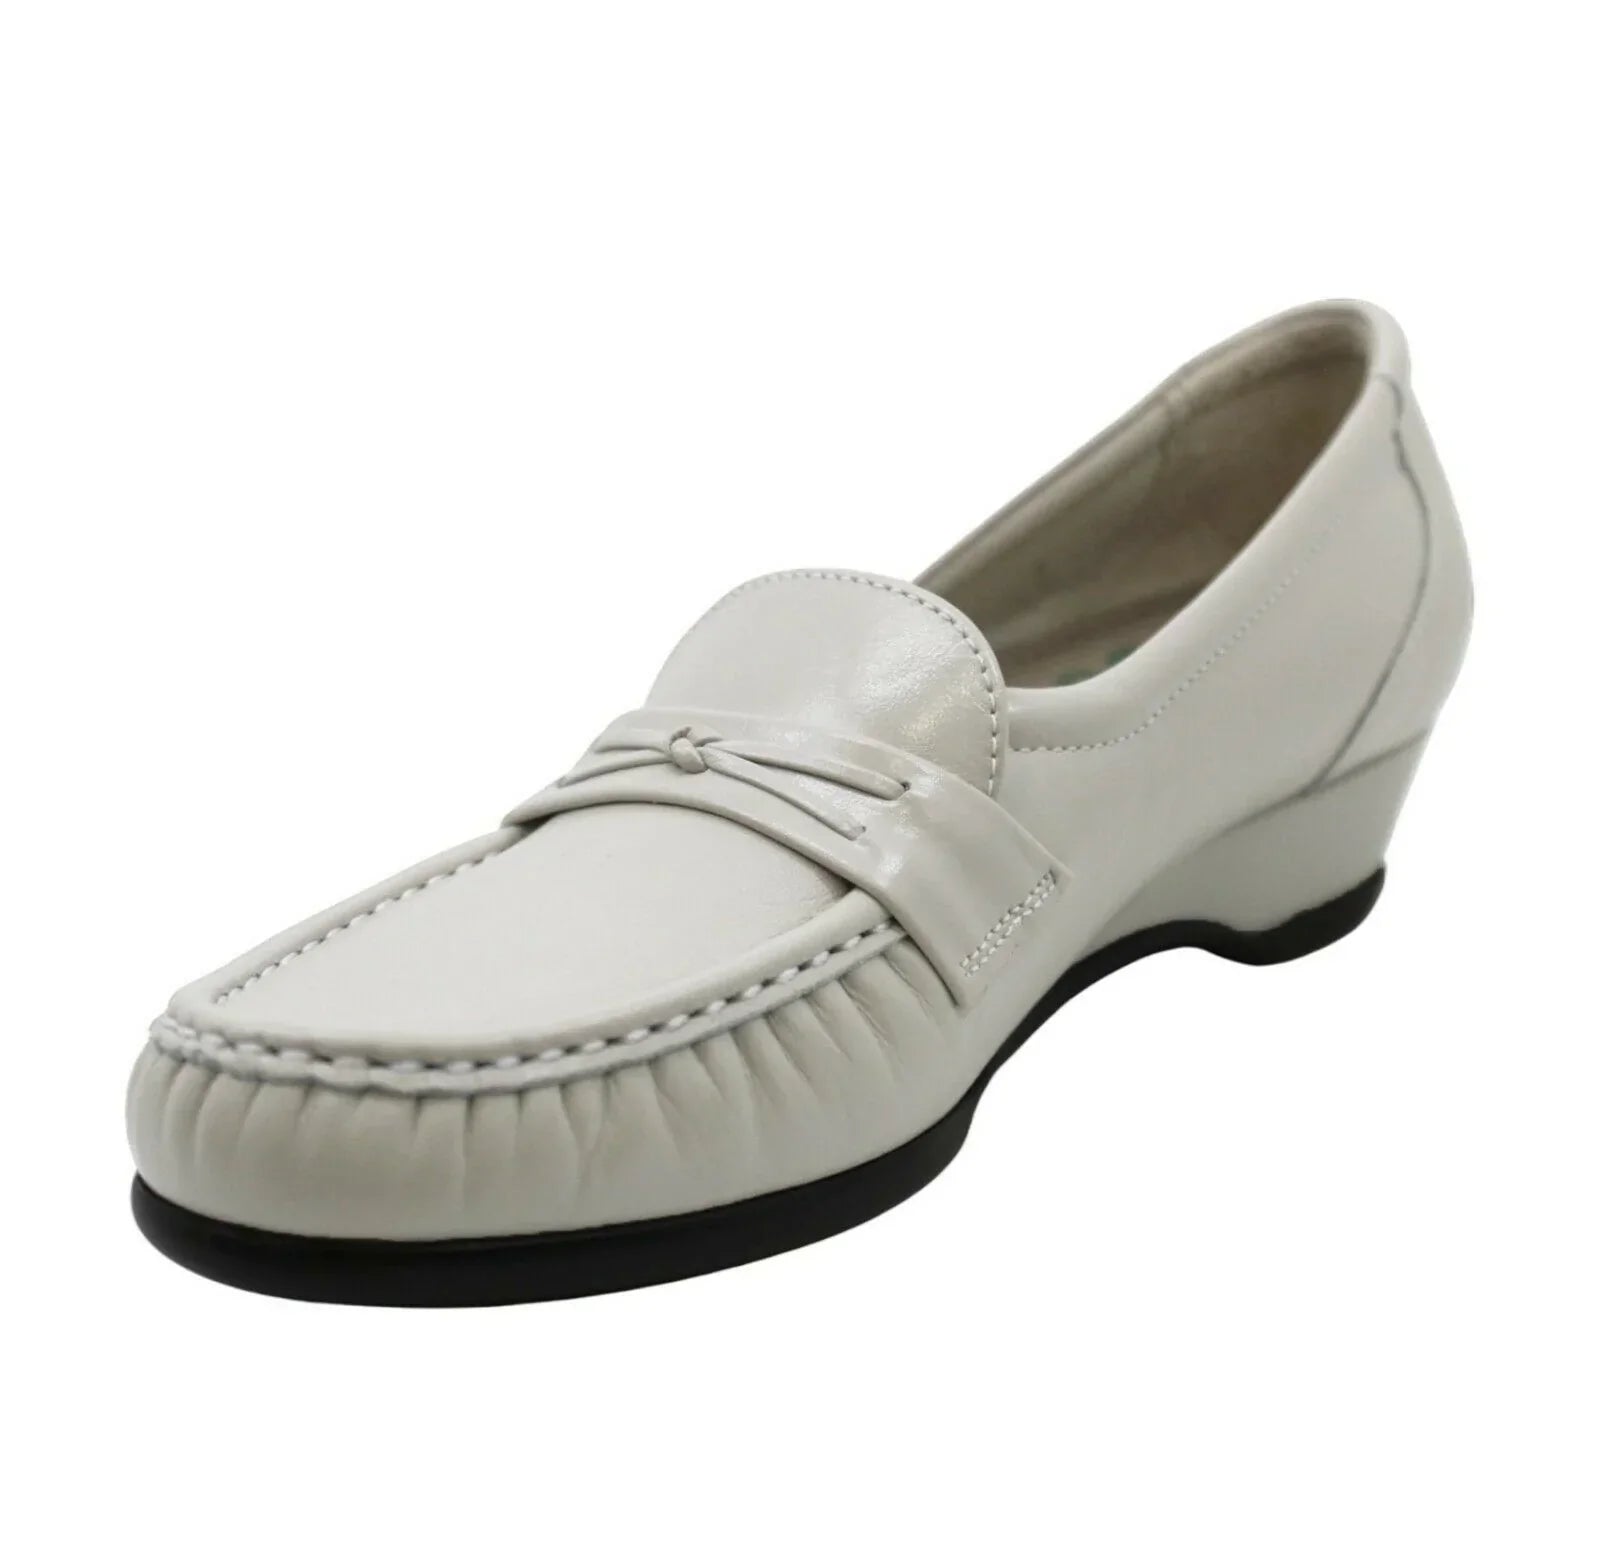 SAS Easier Womens Bone Leather Wedge Loafers Comfort Shoes US 12 Wide - SVNYFancy